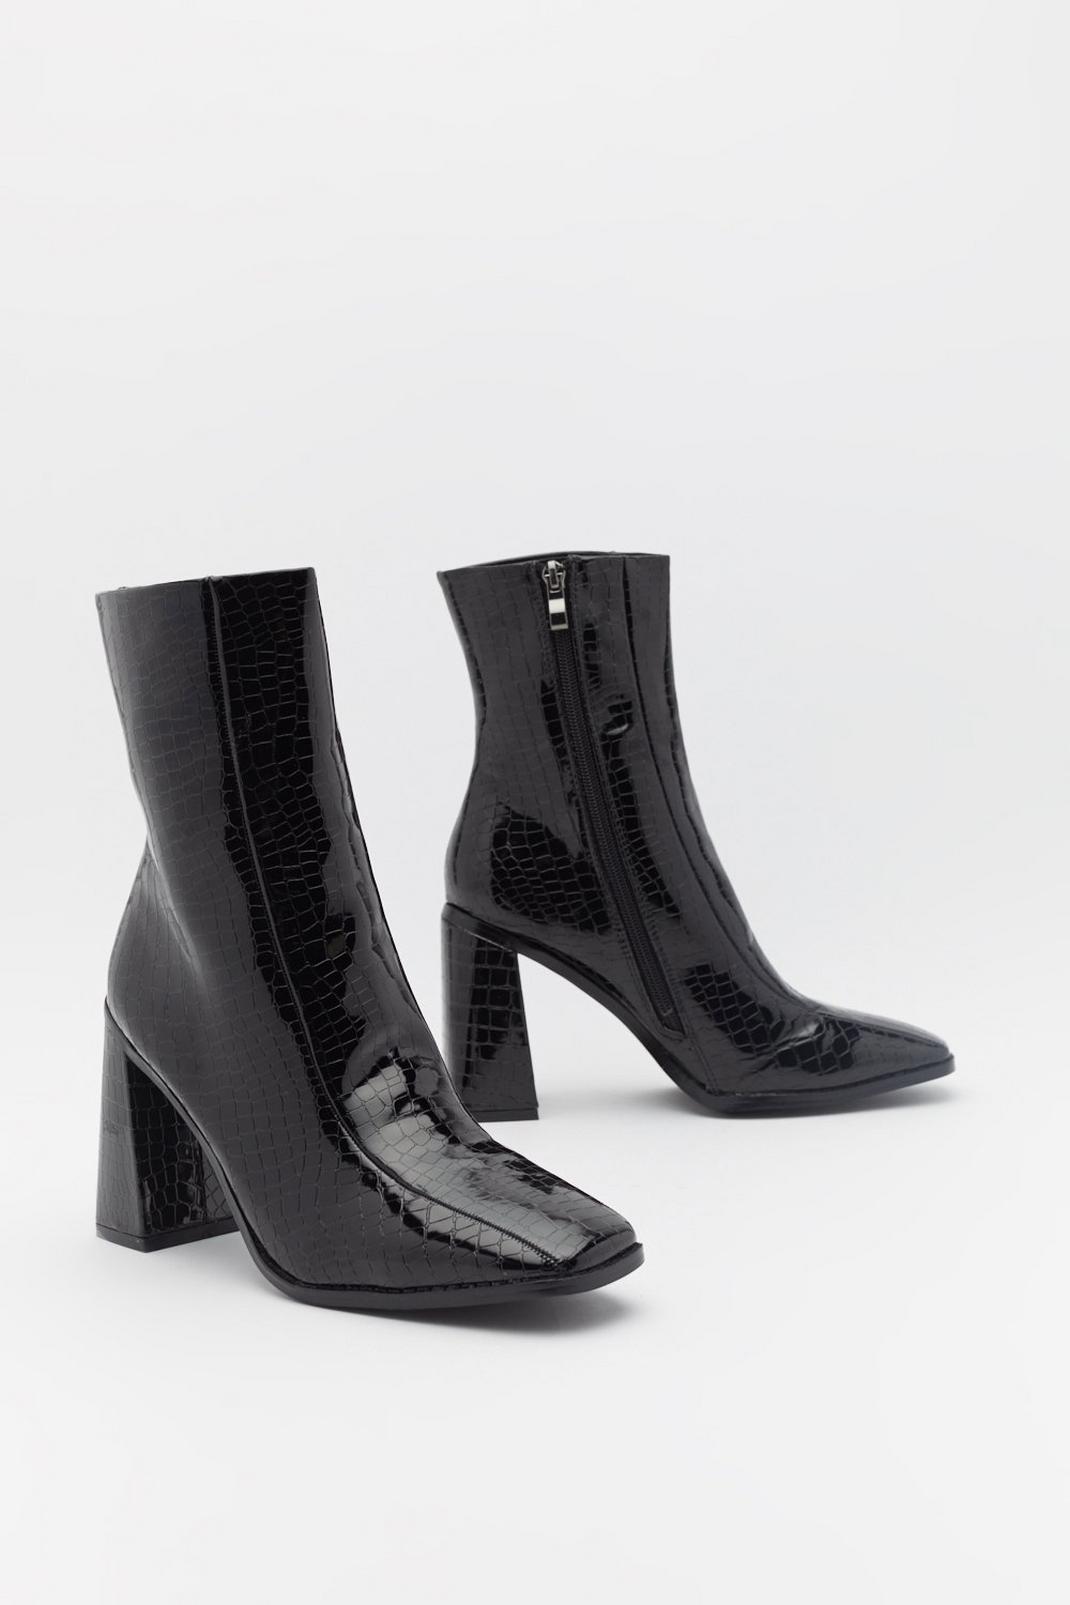 105 Croc Square Toe Flare Heel Boots image number 1